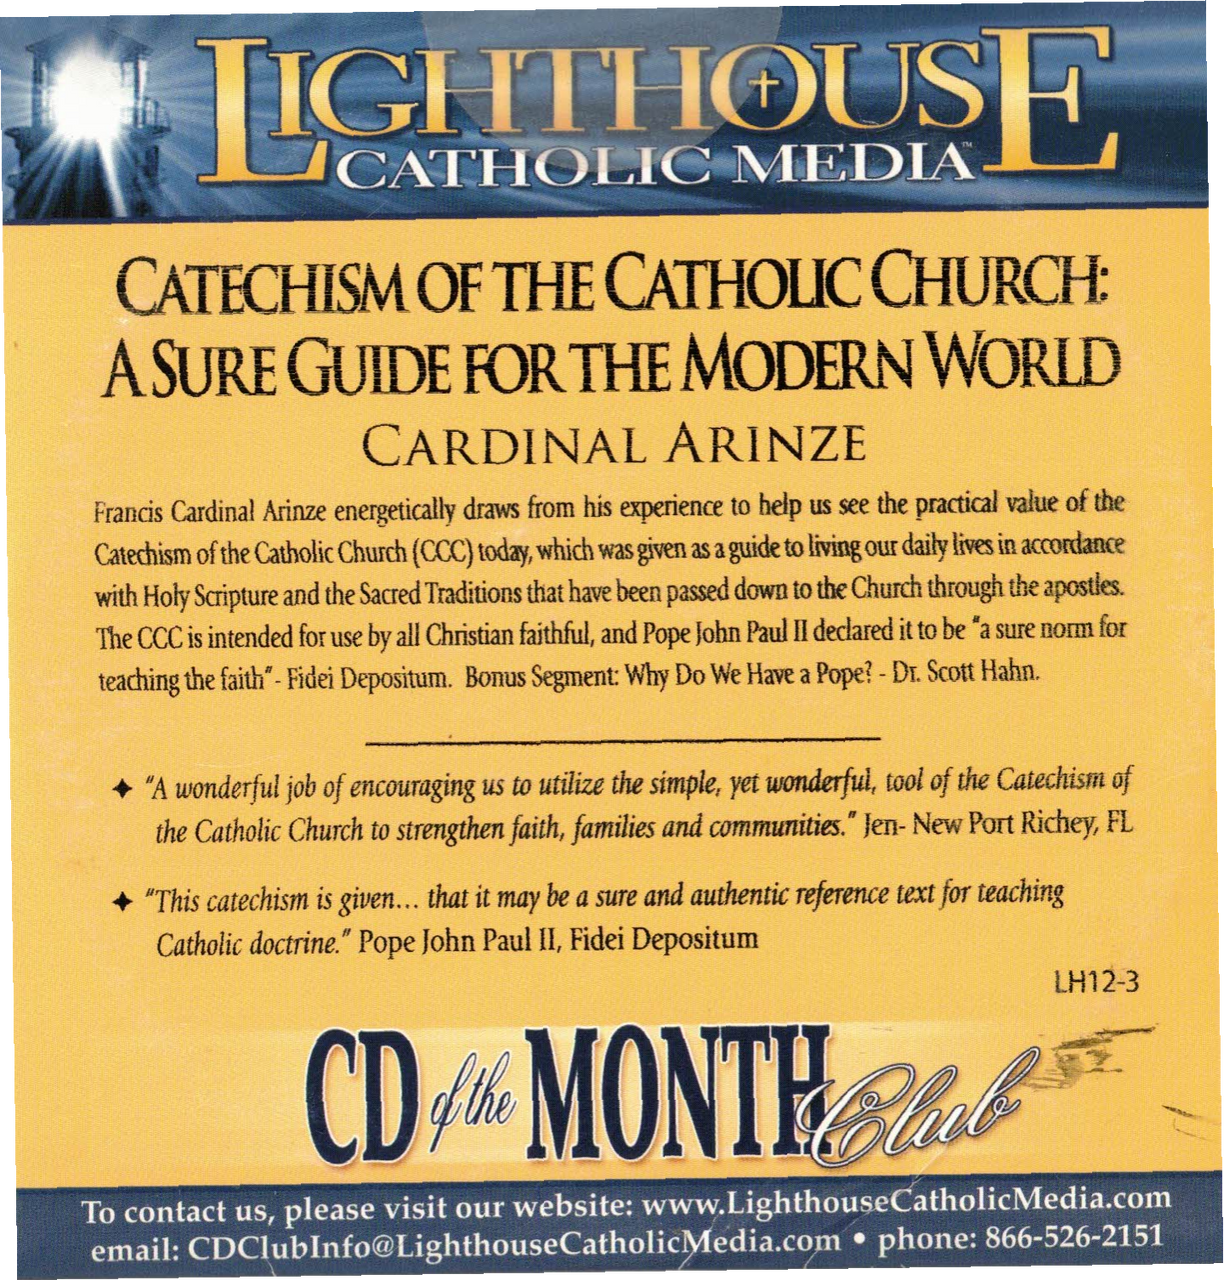 Catechism of the Catholic Church: A Sure Guide For the Modern World CD